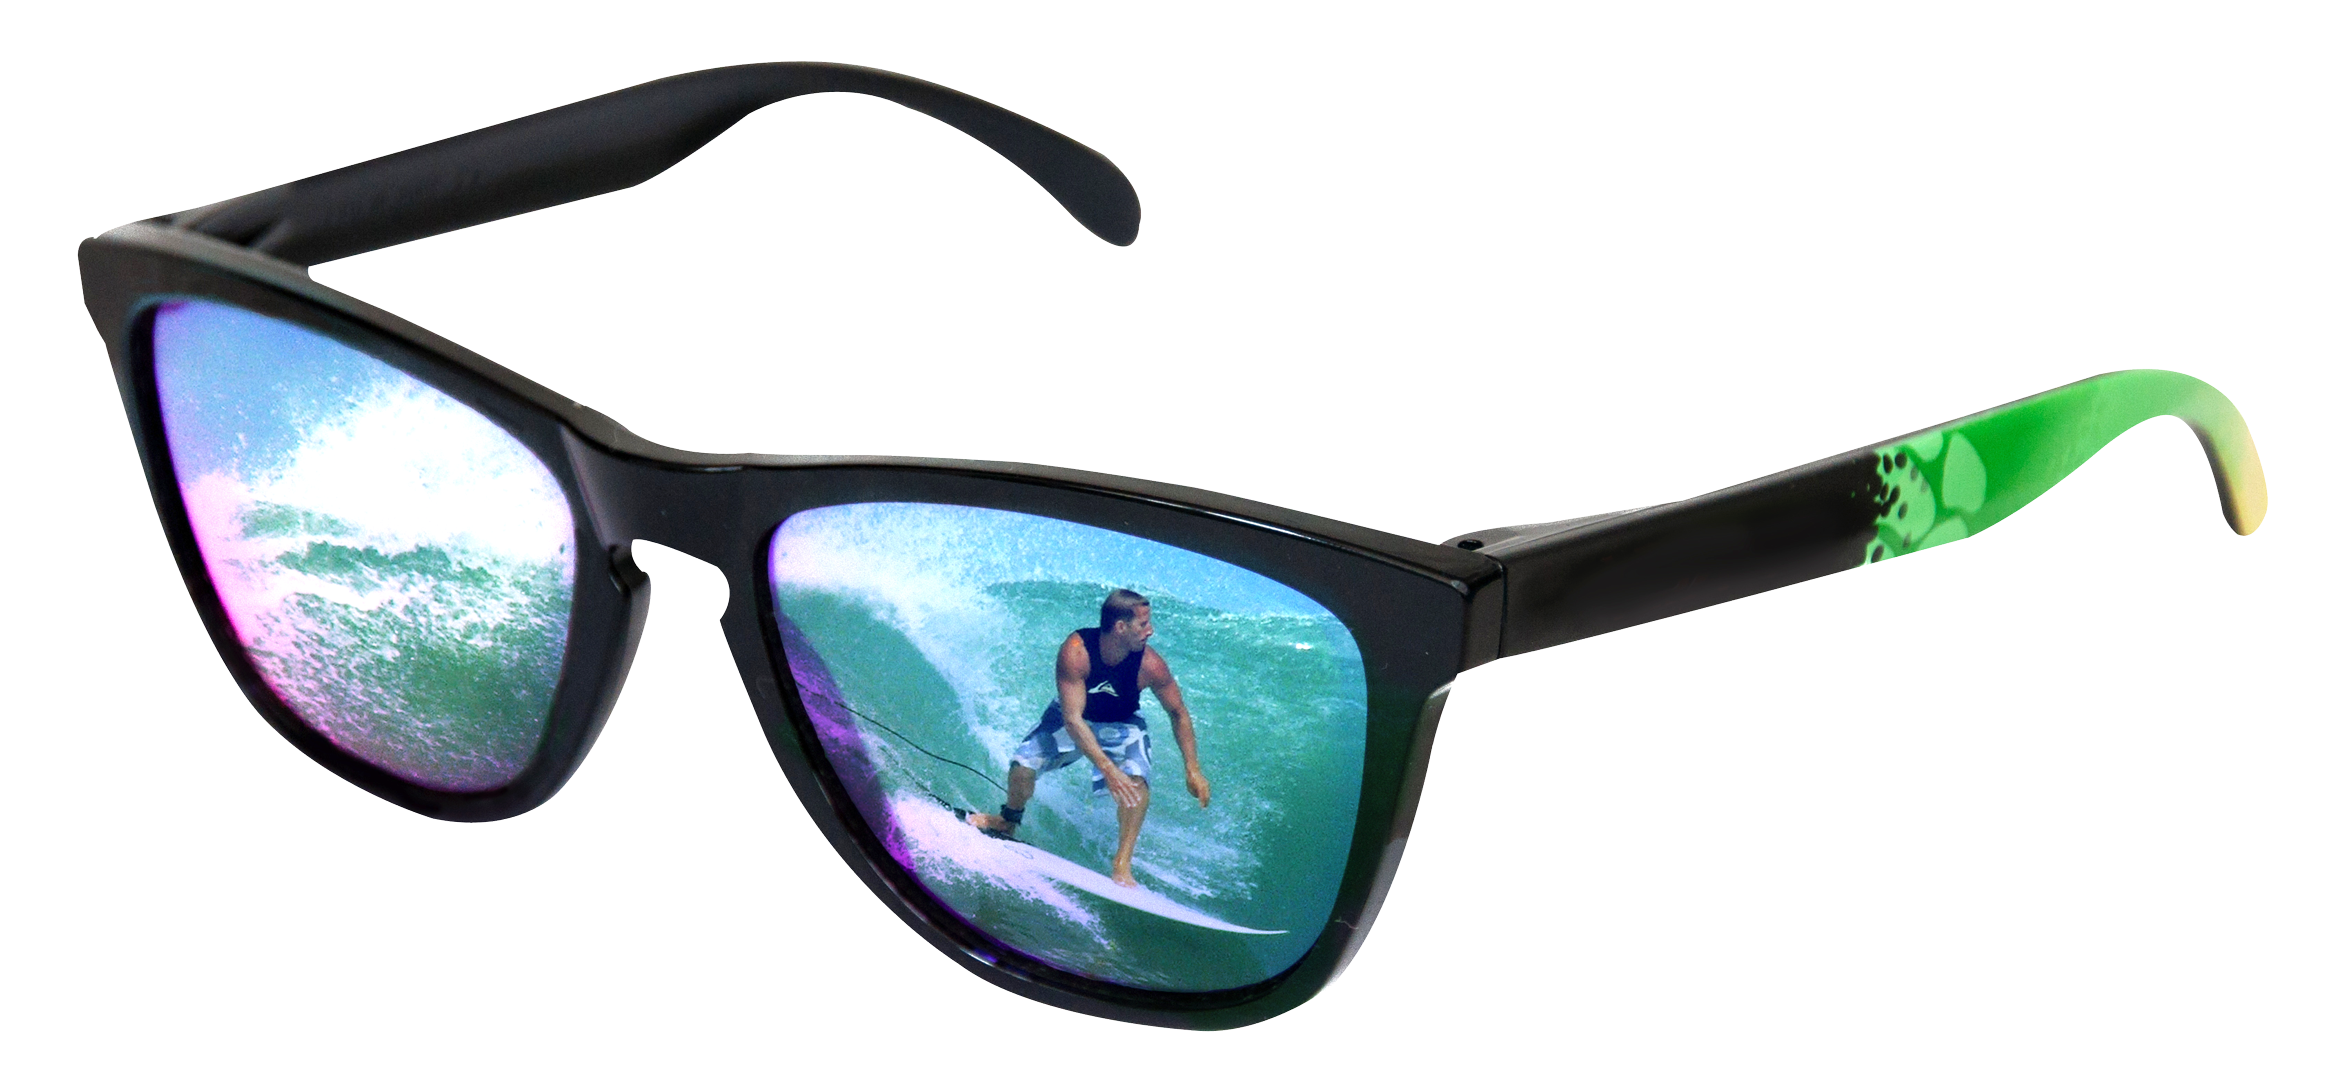 Sunglasses With Surfer Reflection Png Image - Glasses, Transparent background PNG HD thumbnail